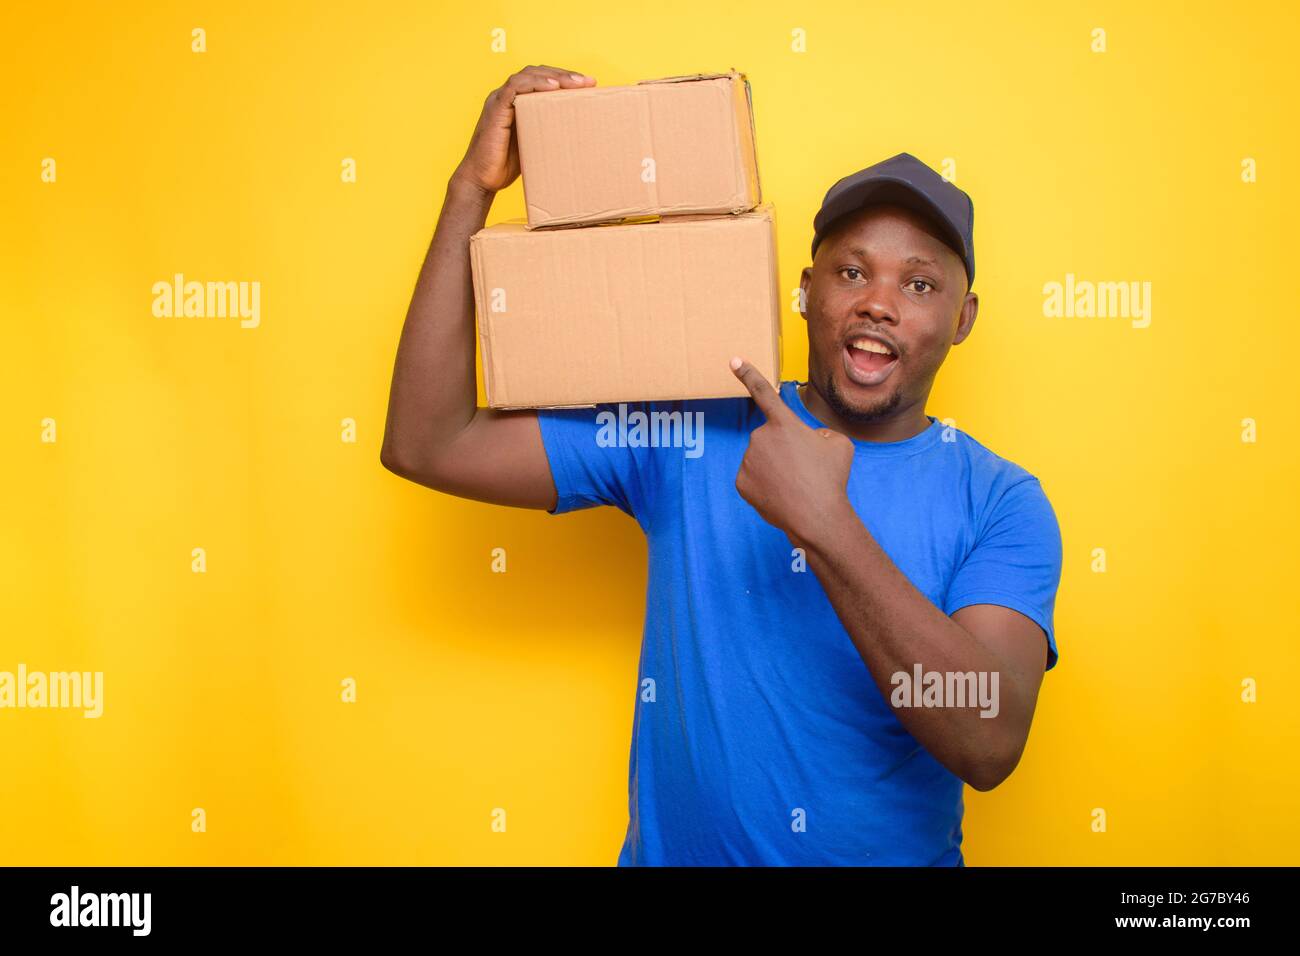 An African dispatch man with face cap, pointing to the boxes he is carrying on his shoulder Stock Photo